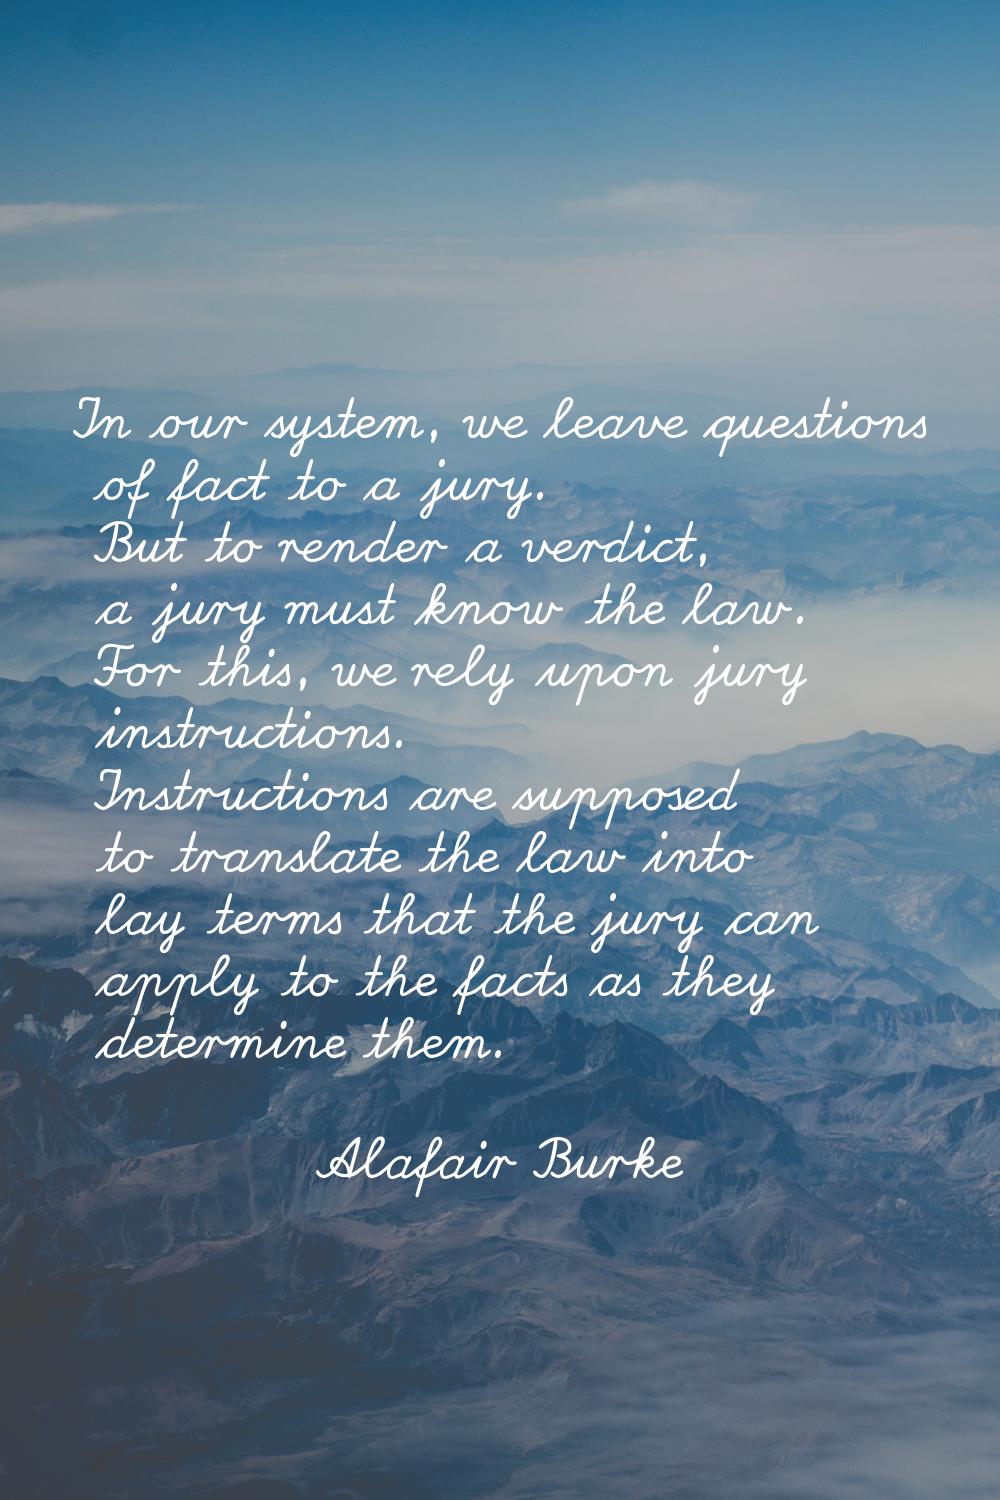 In our system, we leave questions of fact to a jury. But to render a verdict, a jury must know the 